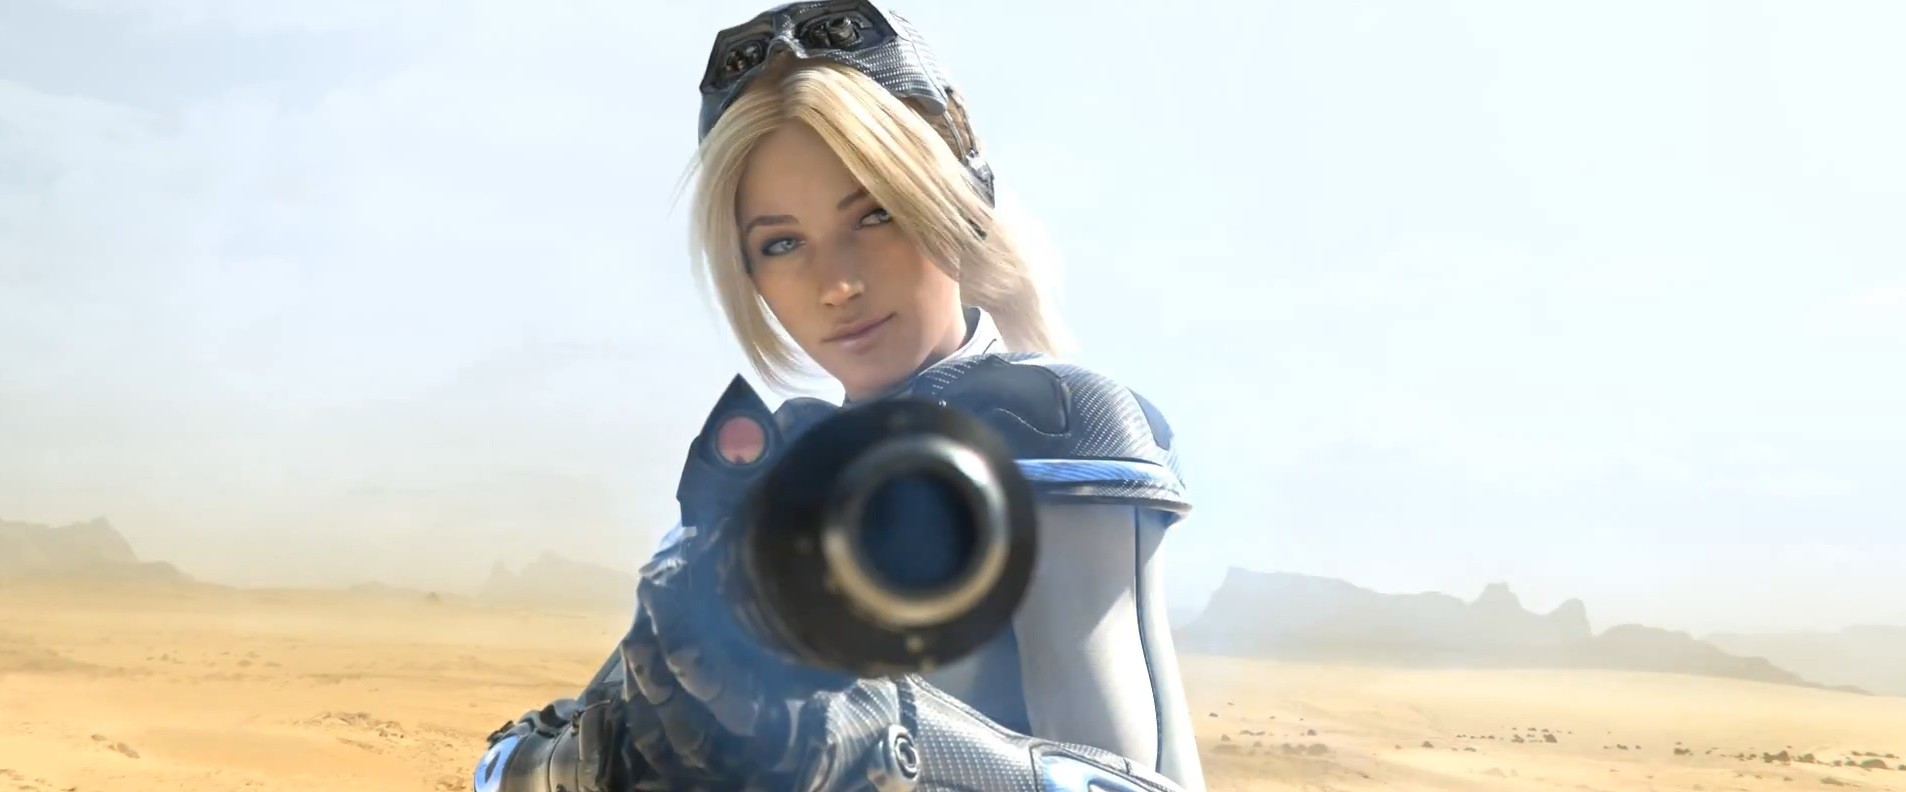 General 1906x792 Heroes of the Storm Nova (Starcraft) blonde CGI PC gaming girls with guns video game girls science fiction women